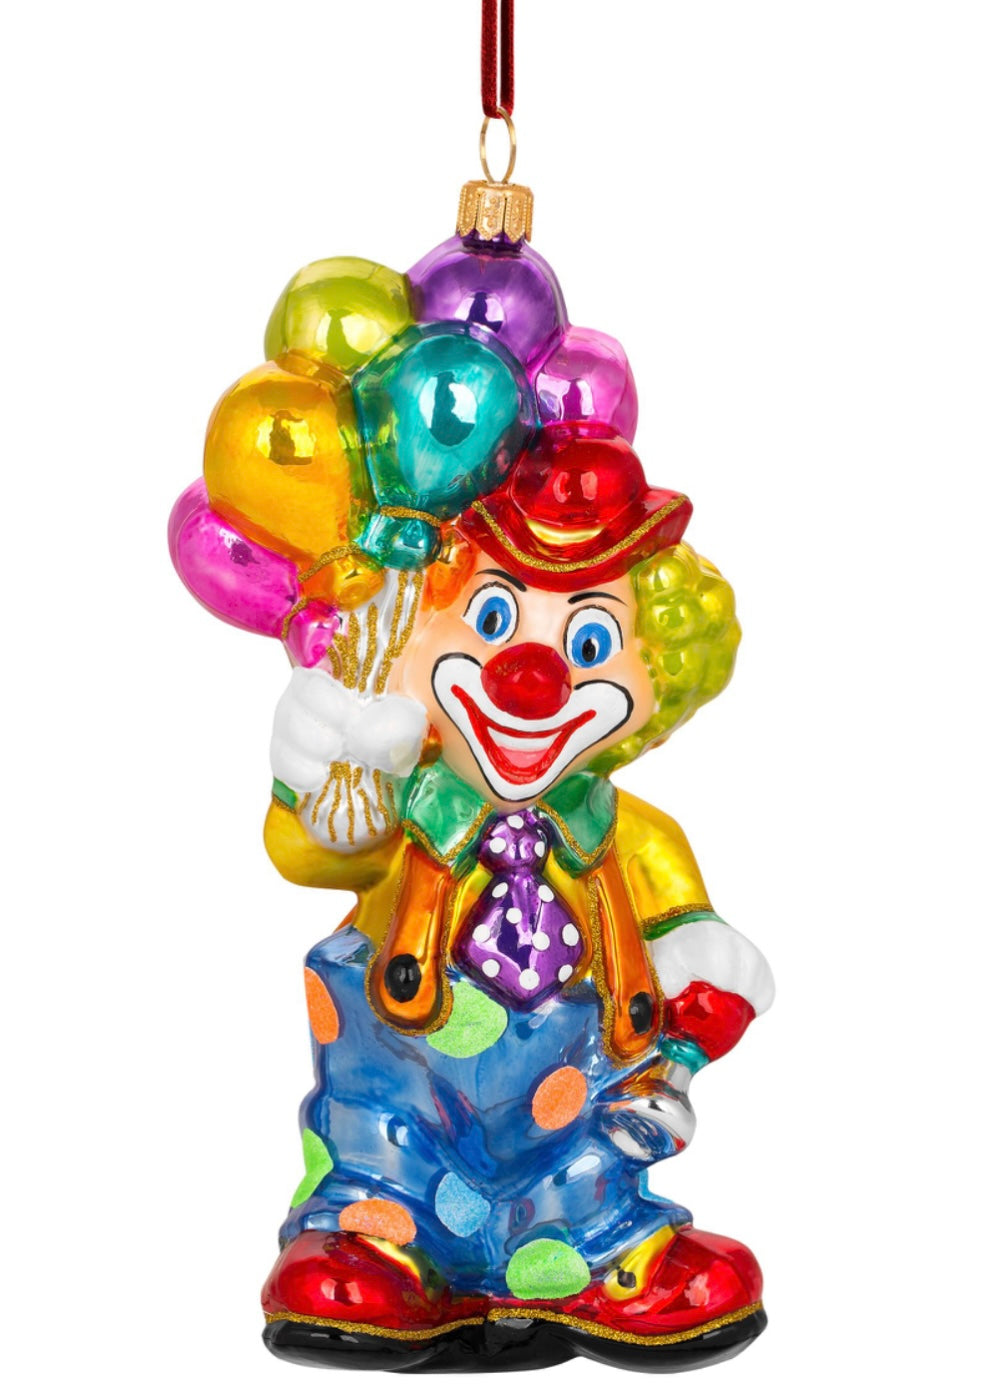 Happy Party Clown HF951 by Huras Family. Made in Poland